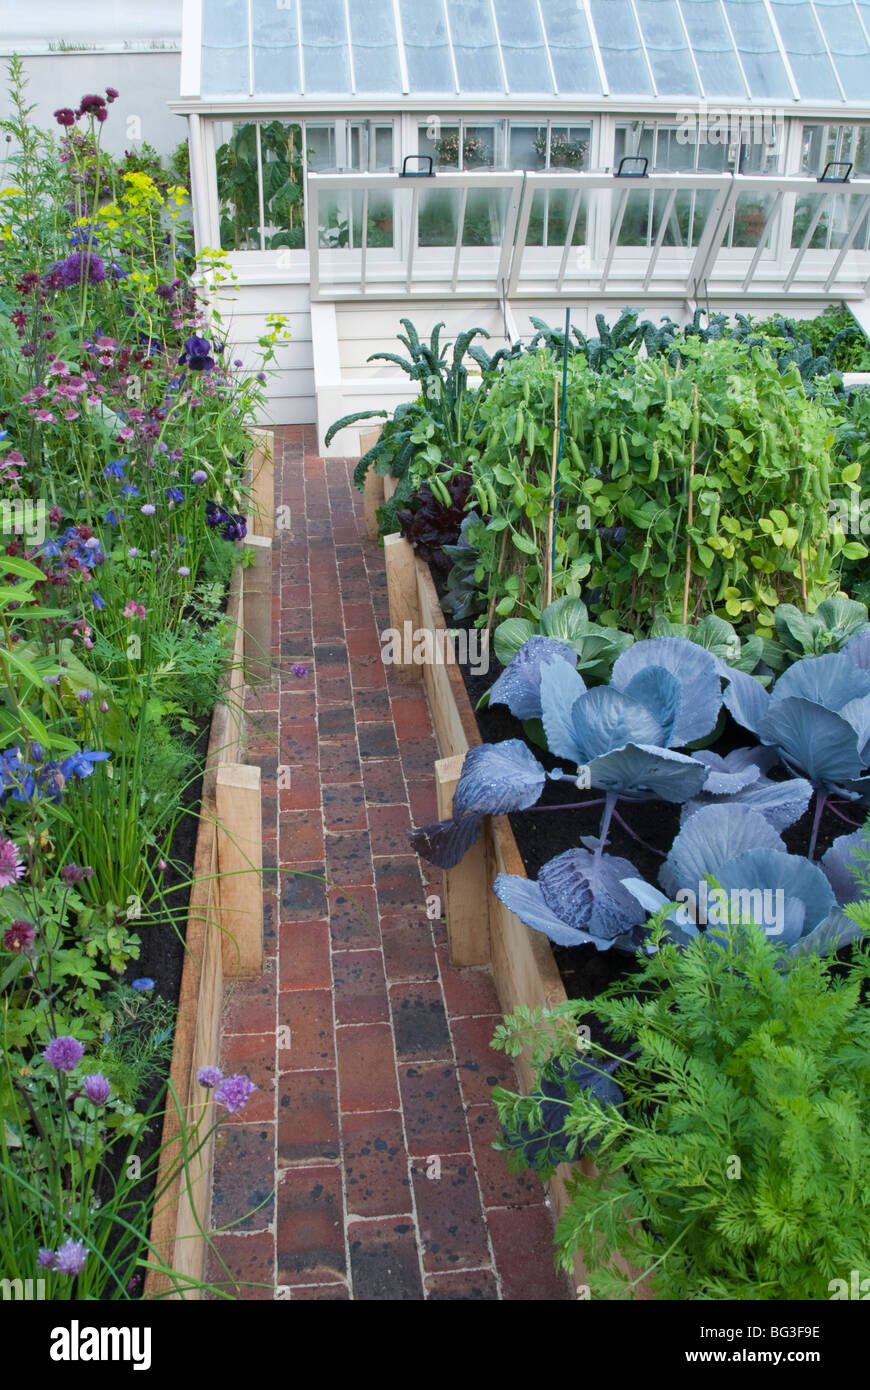 beautiful vegetable garden with raised beds, brick path, modern